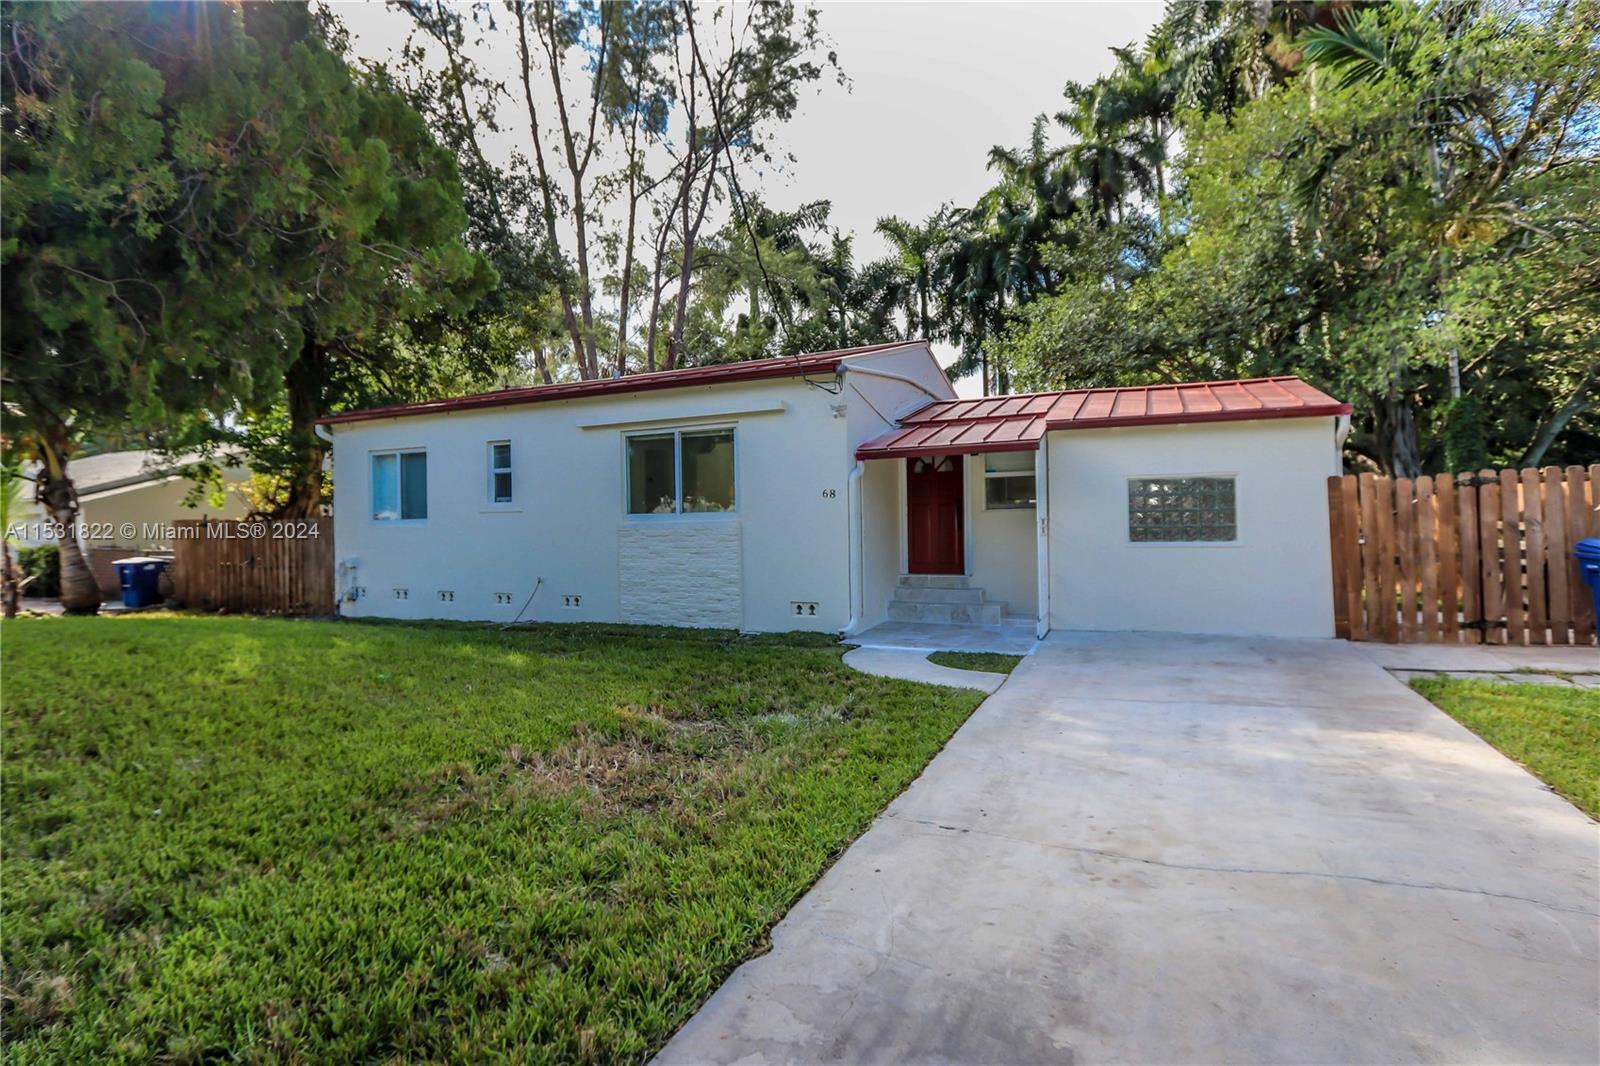 Photo of 68 NW 85th St in Miami, FL